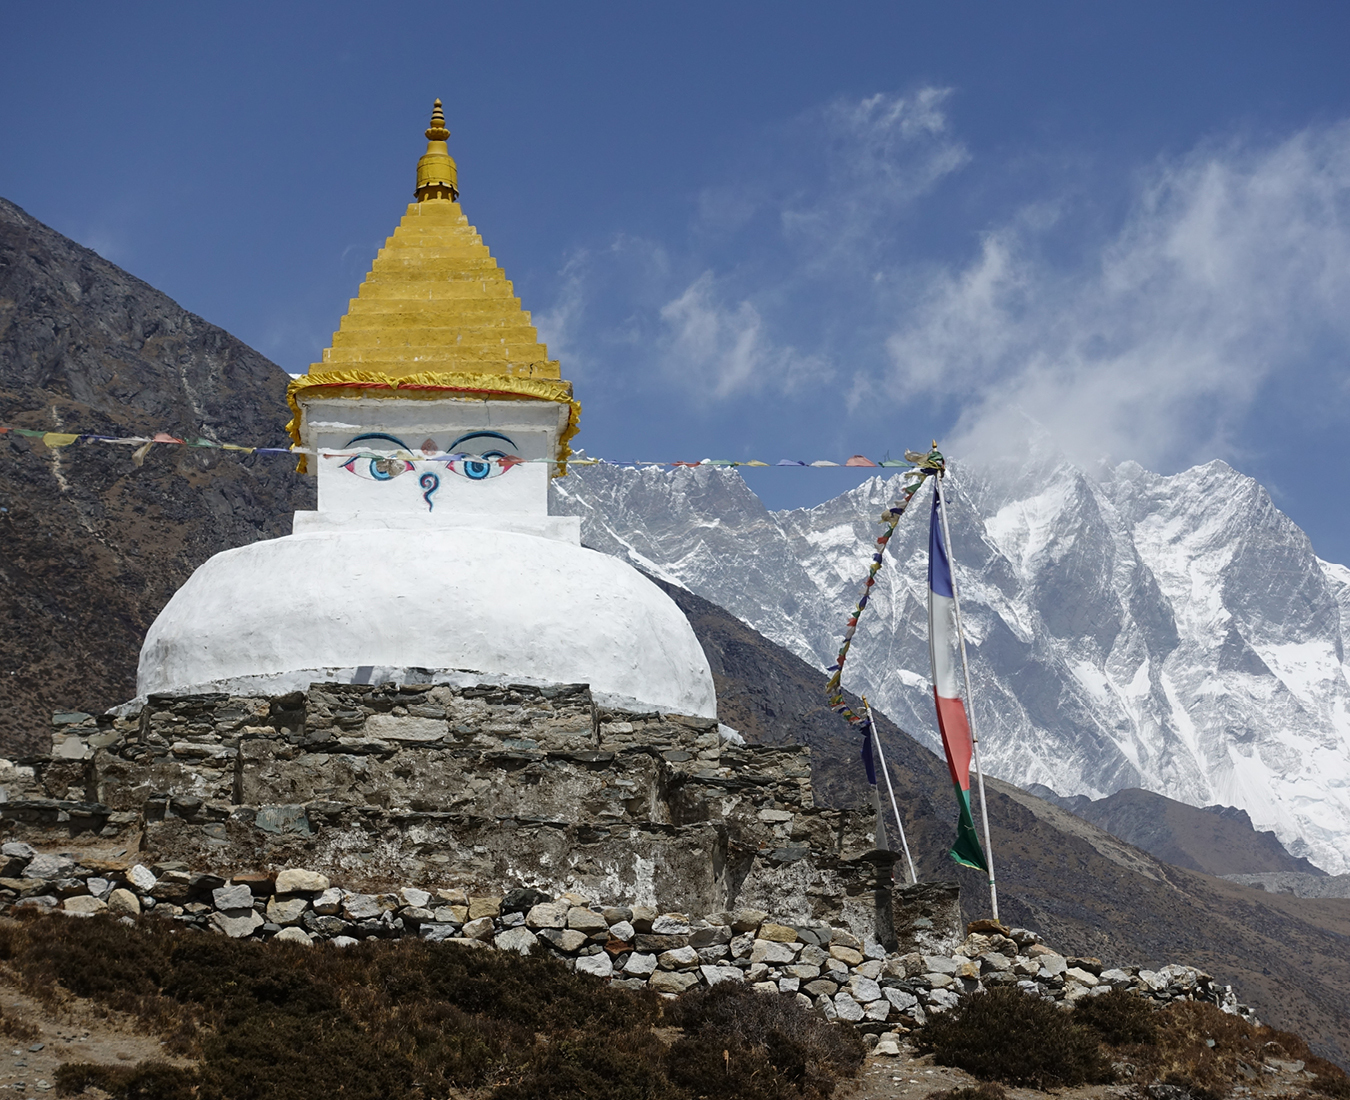 Experience a fabulous blend of natural and cultural sights and scenery on the trek to Everest Base Camp - here a large Buddhist stupa strikes a brilliant contrast to the Himalayan mountains behind.